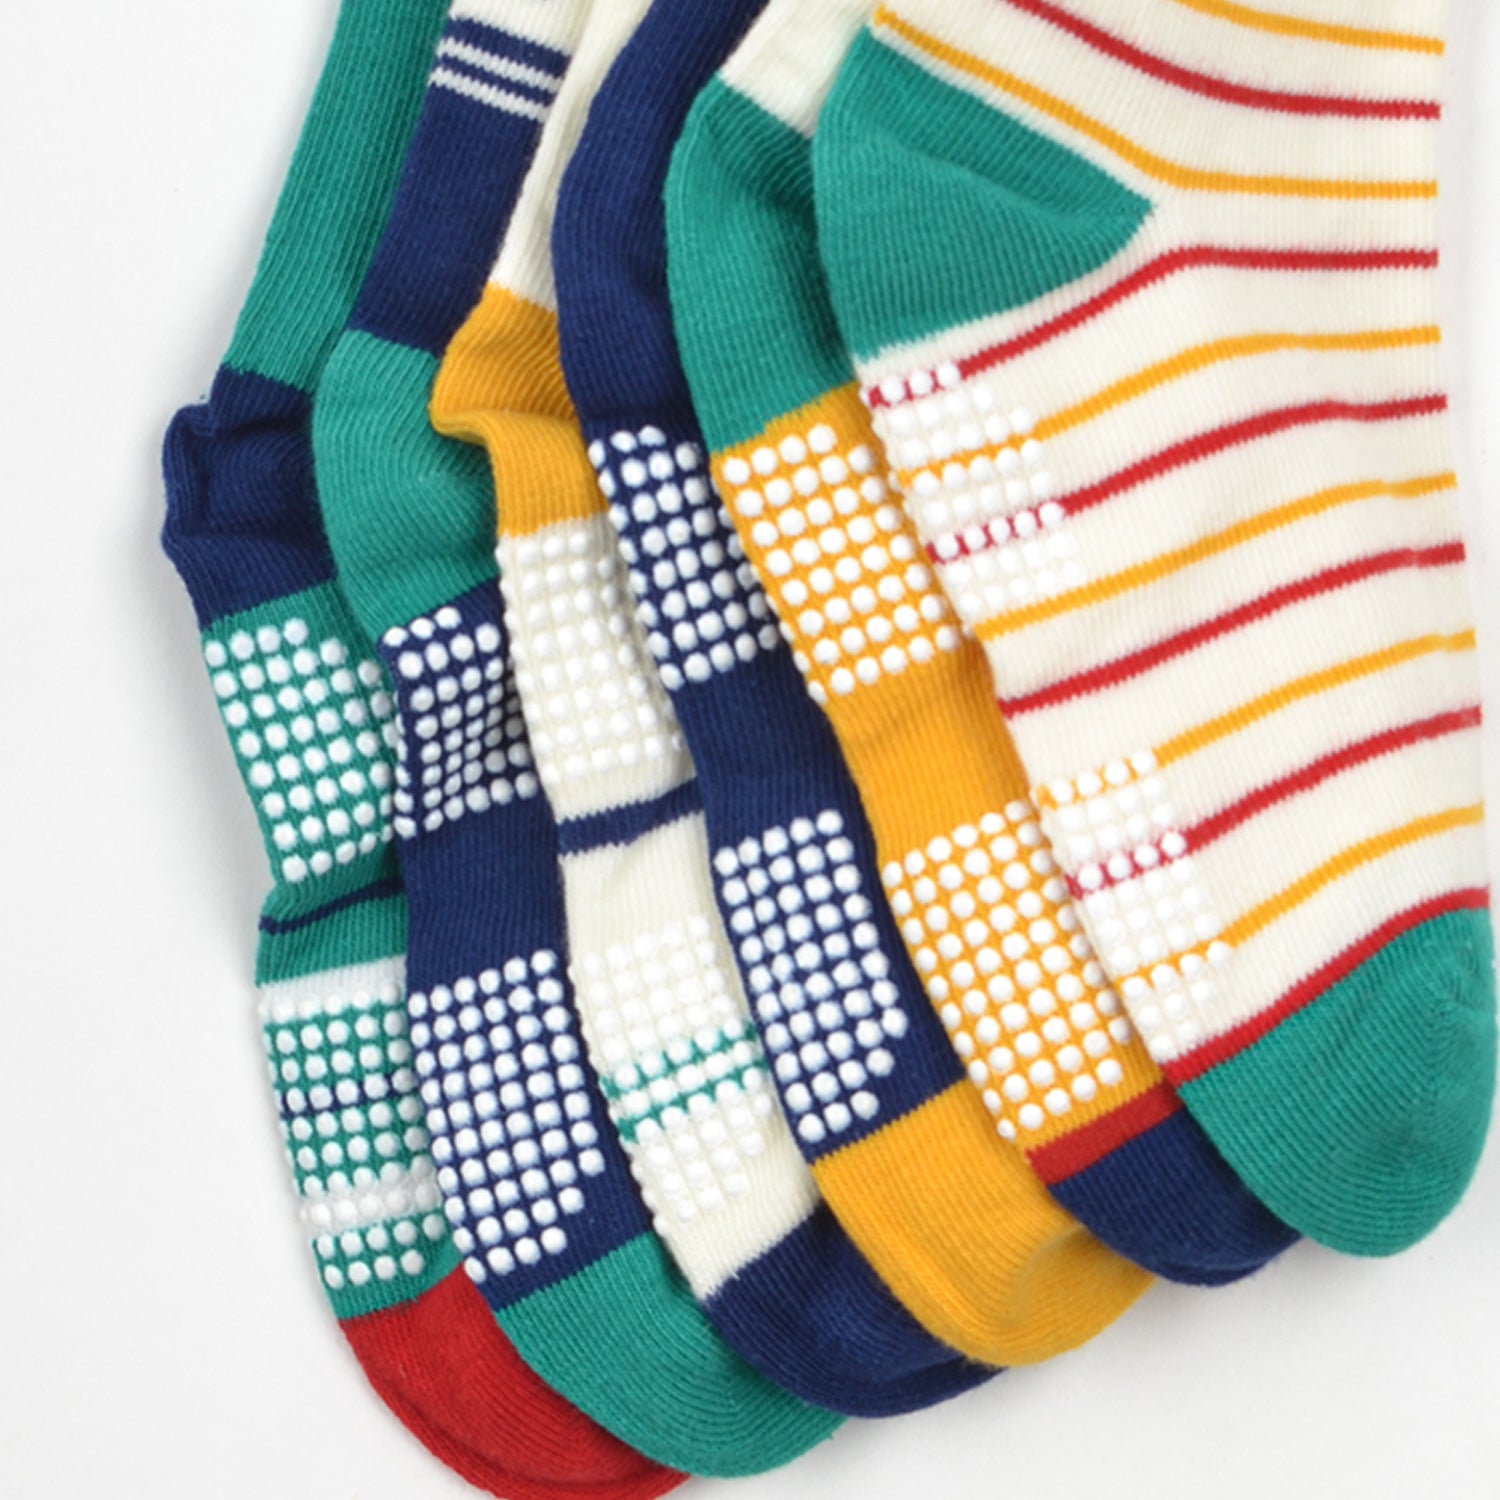 Baby Organic Cotton Antiskid Aircraft Detailed Socks - Multi Colour - Pack of 6